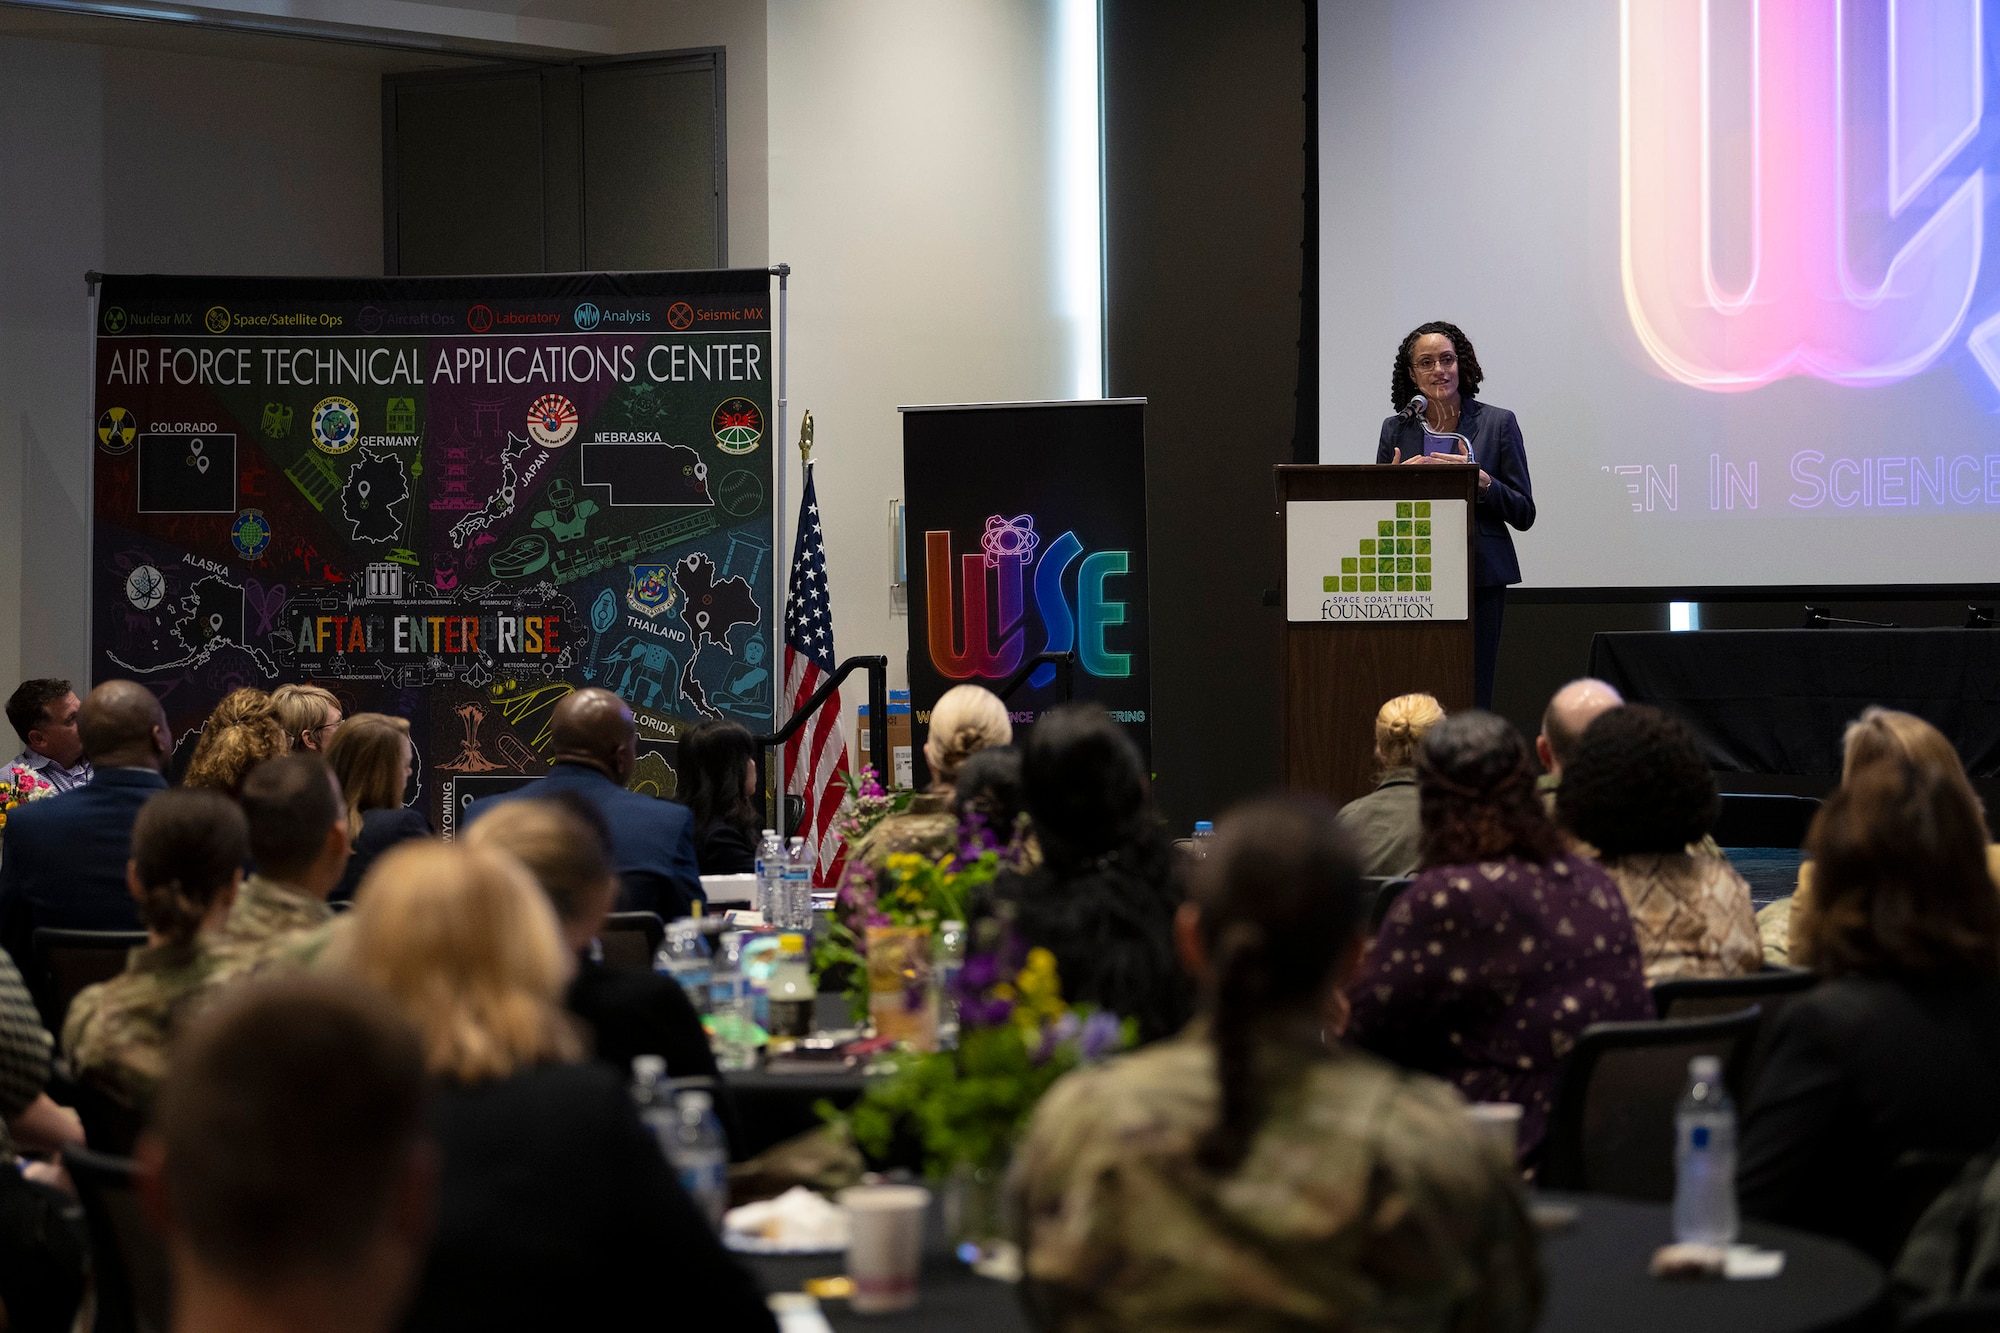 Dr. Stacey A. Dixon, Principal Deputy Director of National Intelligence and the No. 2 U.S. Intelligence Community official, speaks to attendees at the 2024 Women in Science and Engineering Symposium March 12 in Rockledge, Fla.  Dixon was one of several dignitaries who imparted their wisdom and experience as senior professionals in STEM career fields.  The WiSE Symposium, hosted by the Air Force Technical Applications Center at Patrick Space Force Base, Fla., is a diversity initiative designed to highlight and bring attention to the value that gender diversity brings to the science, technology, engineering, and mathematics workforce.  (U.S. Air Force photo by Matthew S. Jurgens)